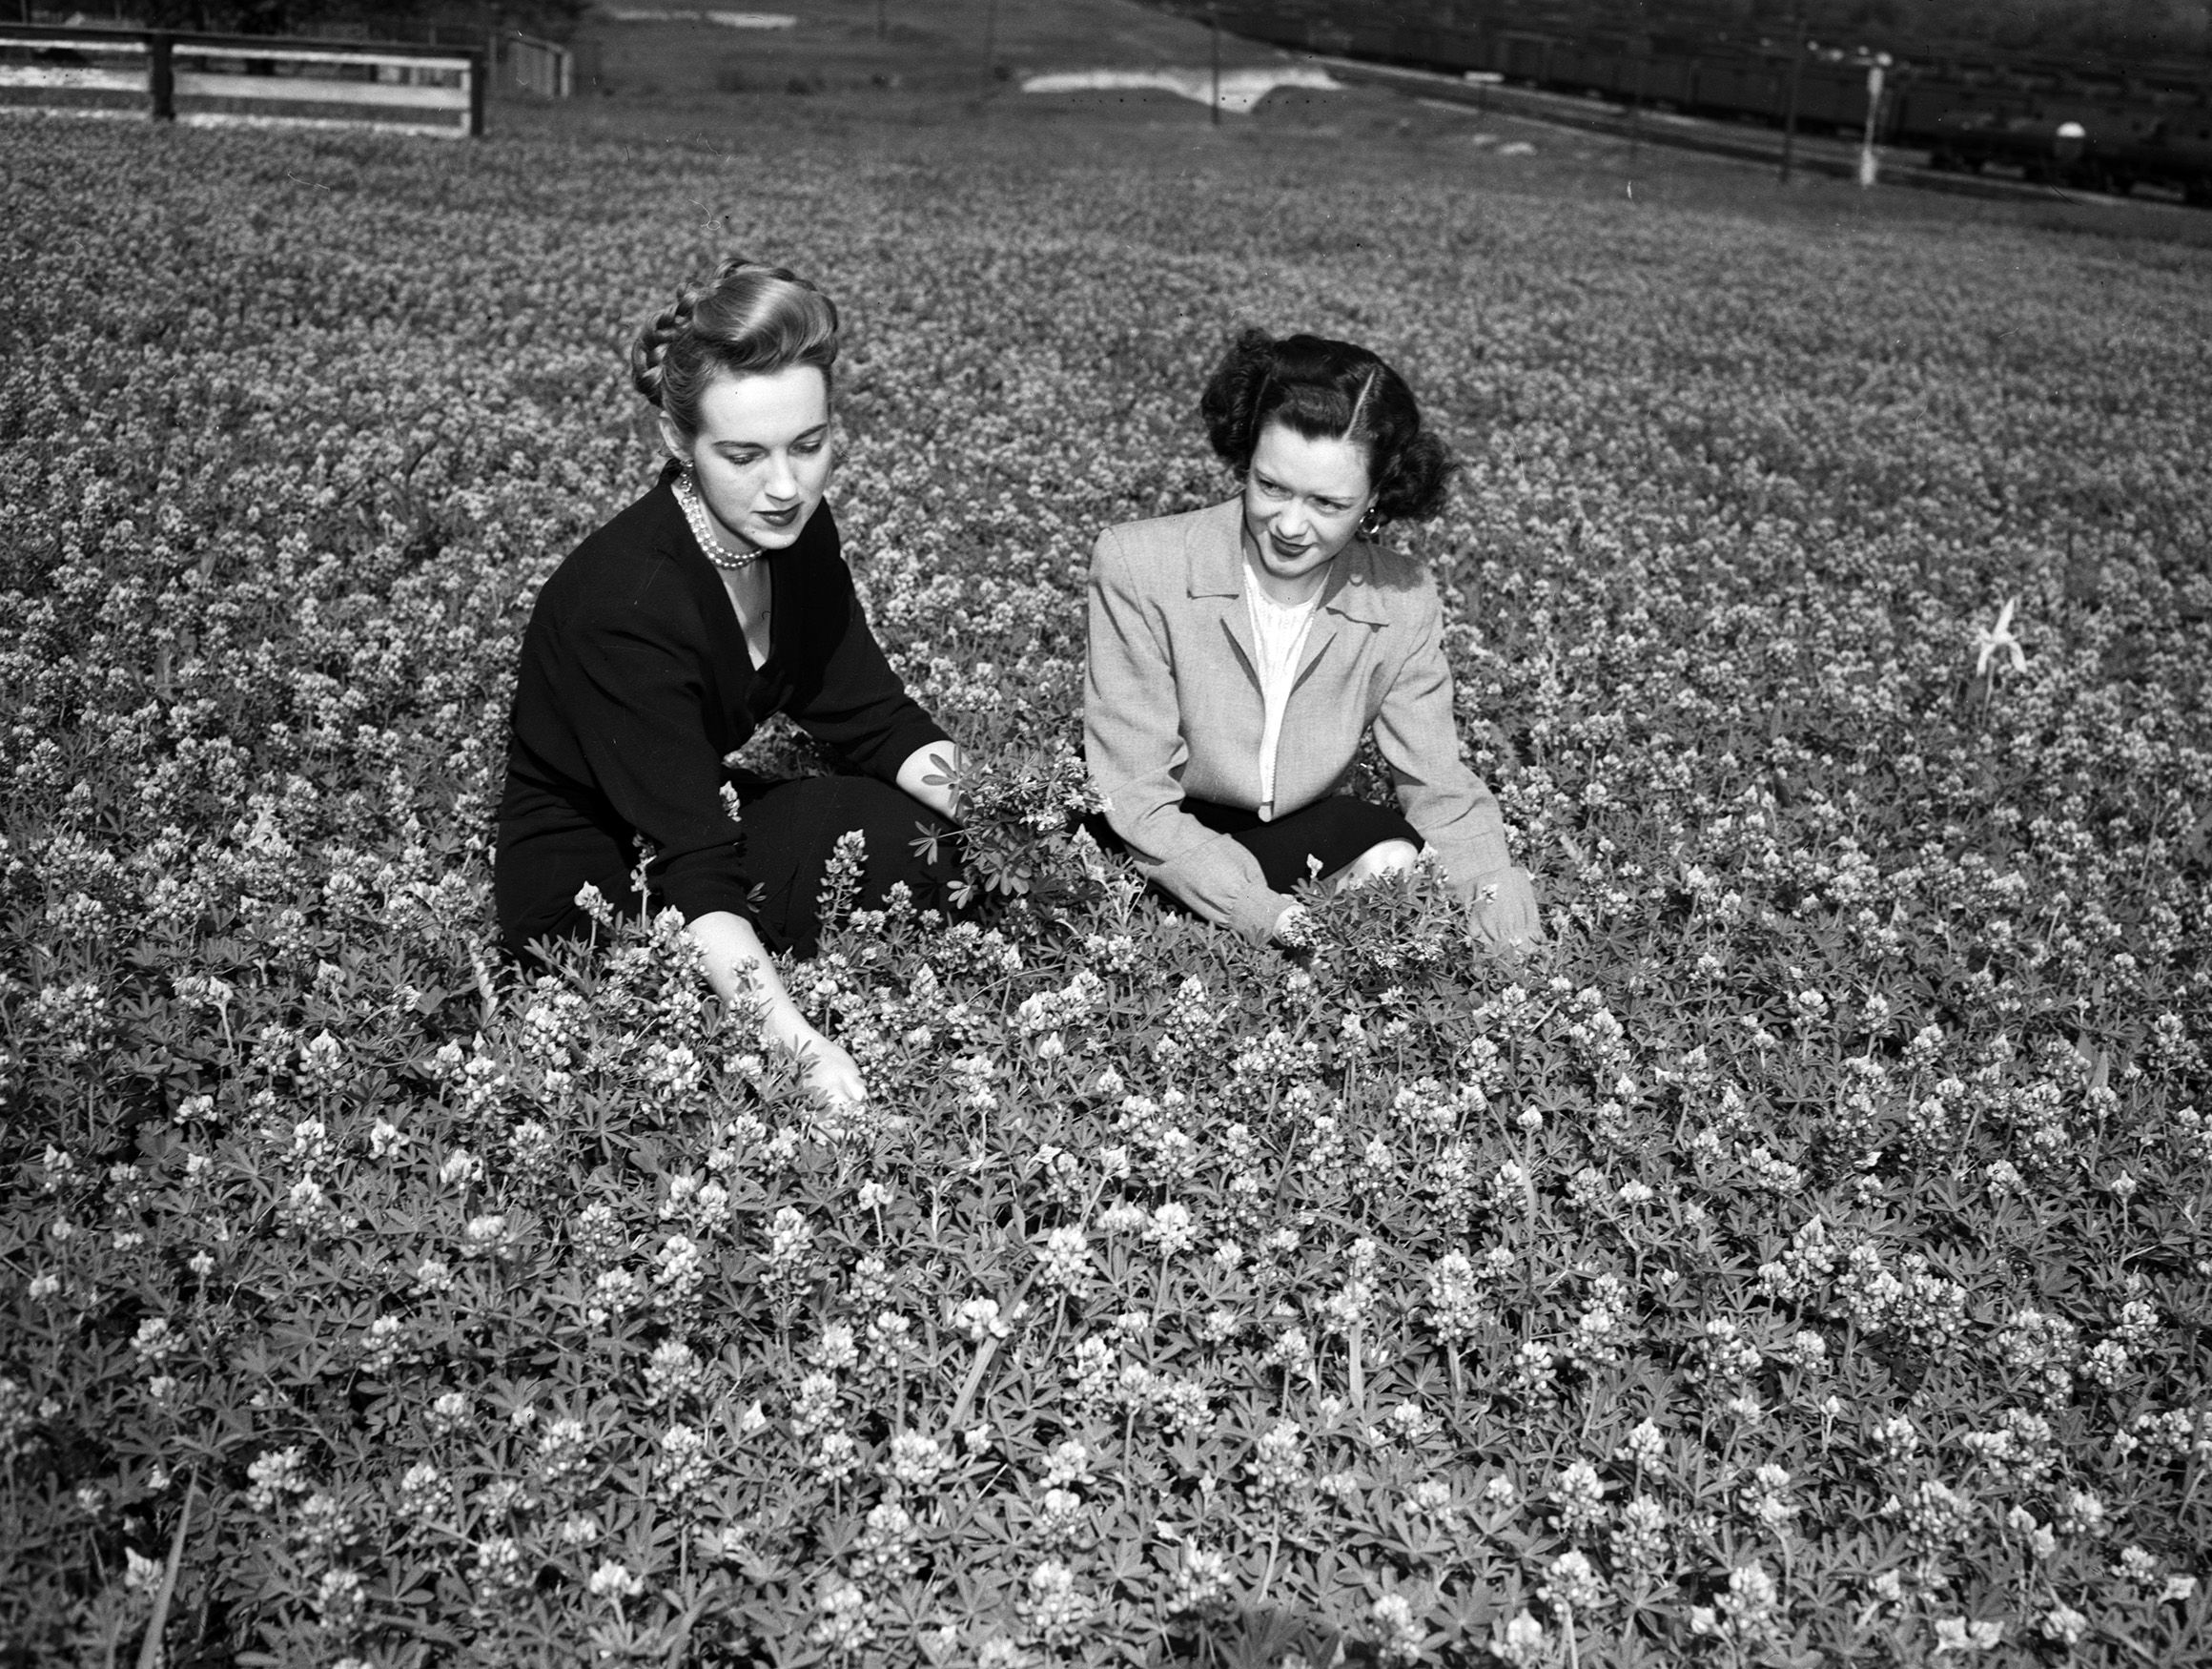 Black and white photo of two women sitting in a field of bluebonnets, picking them from the ground.